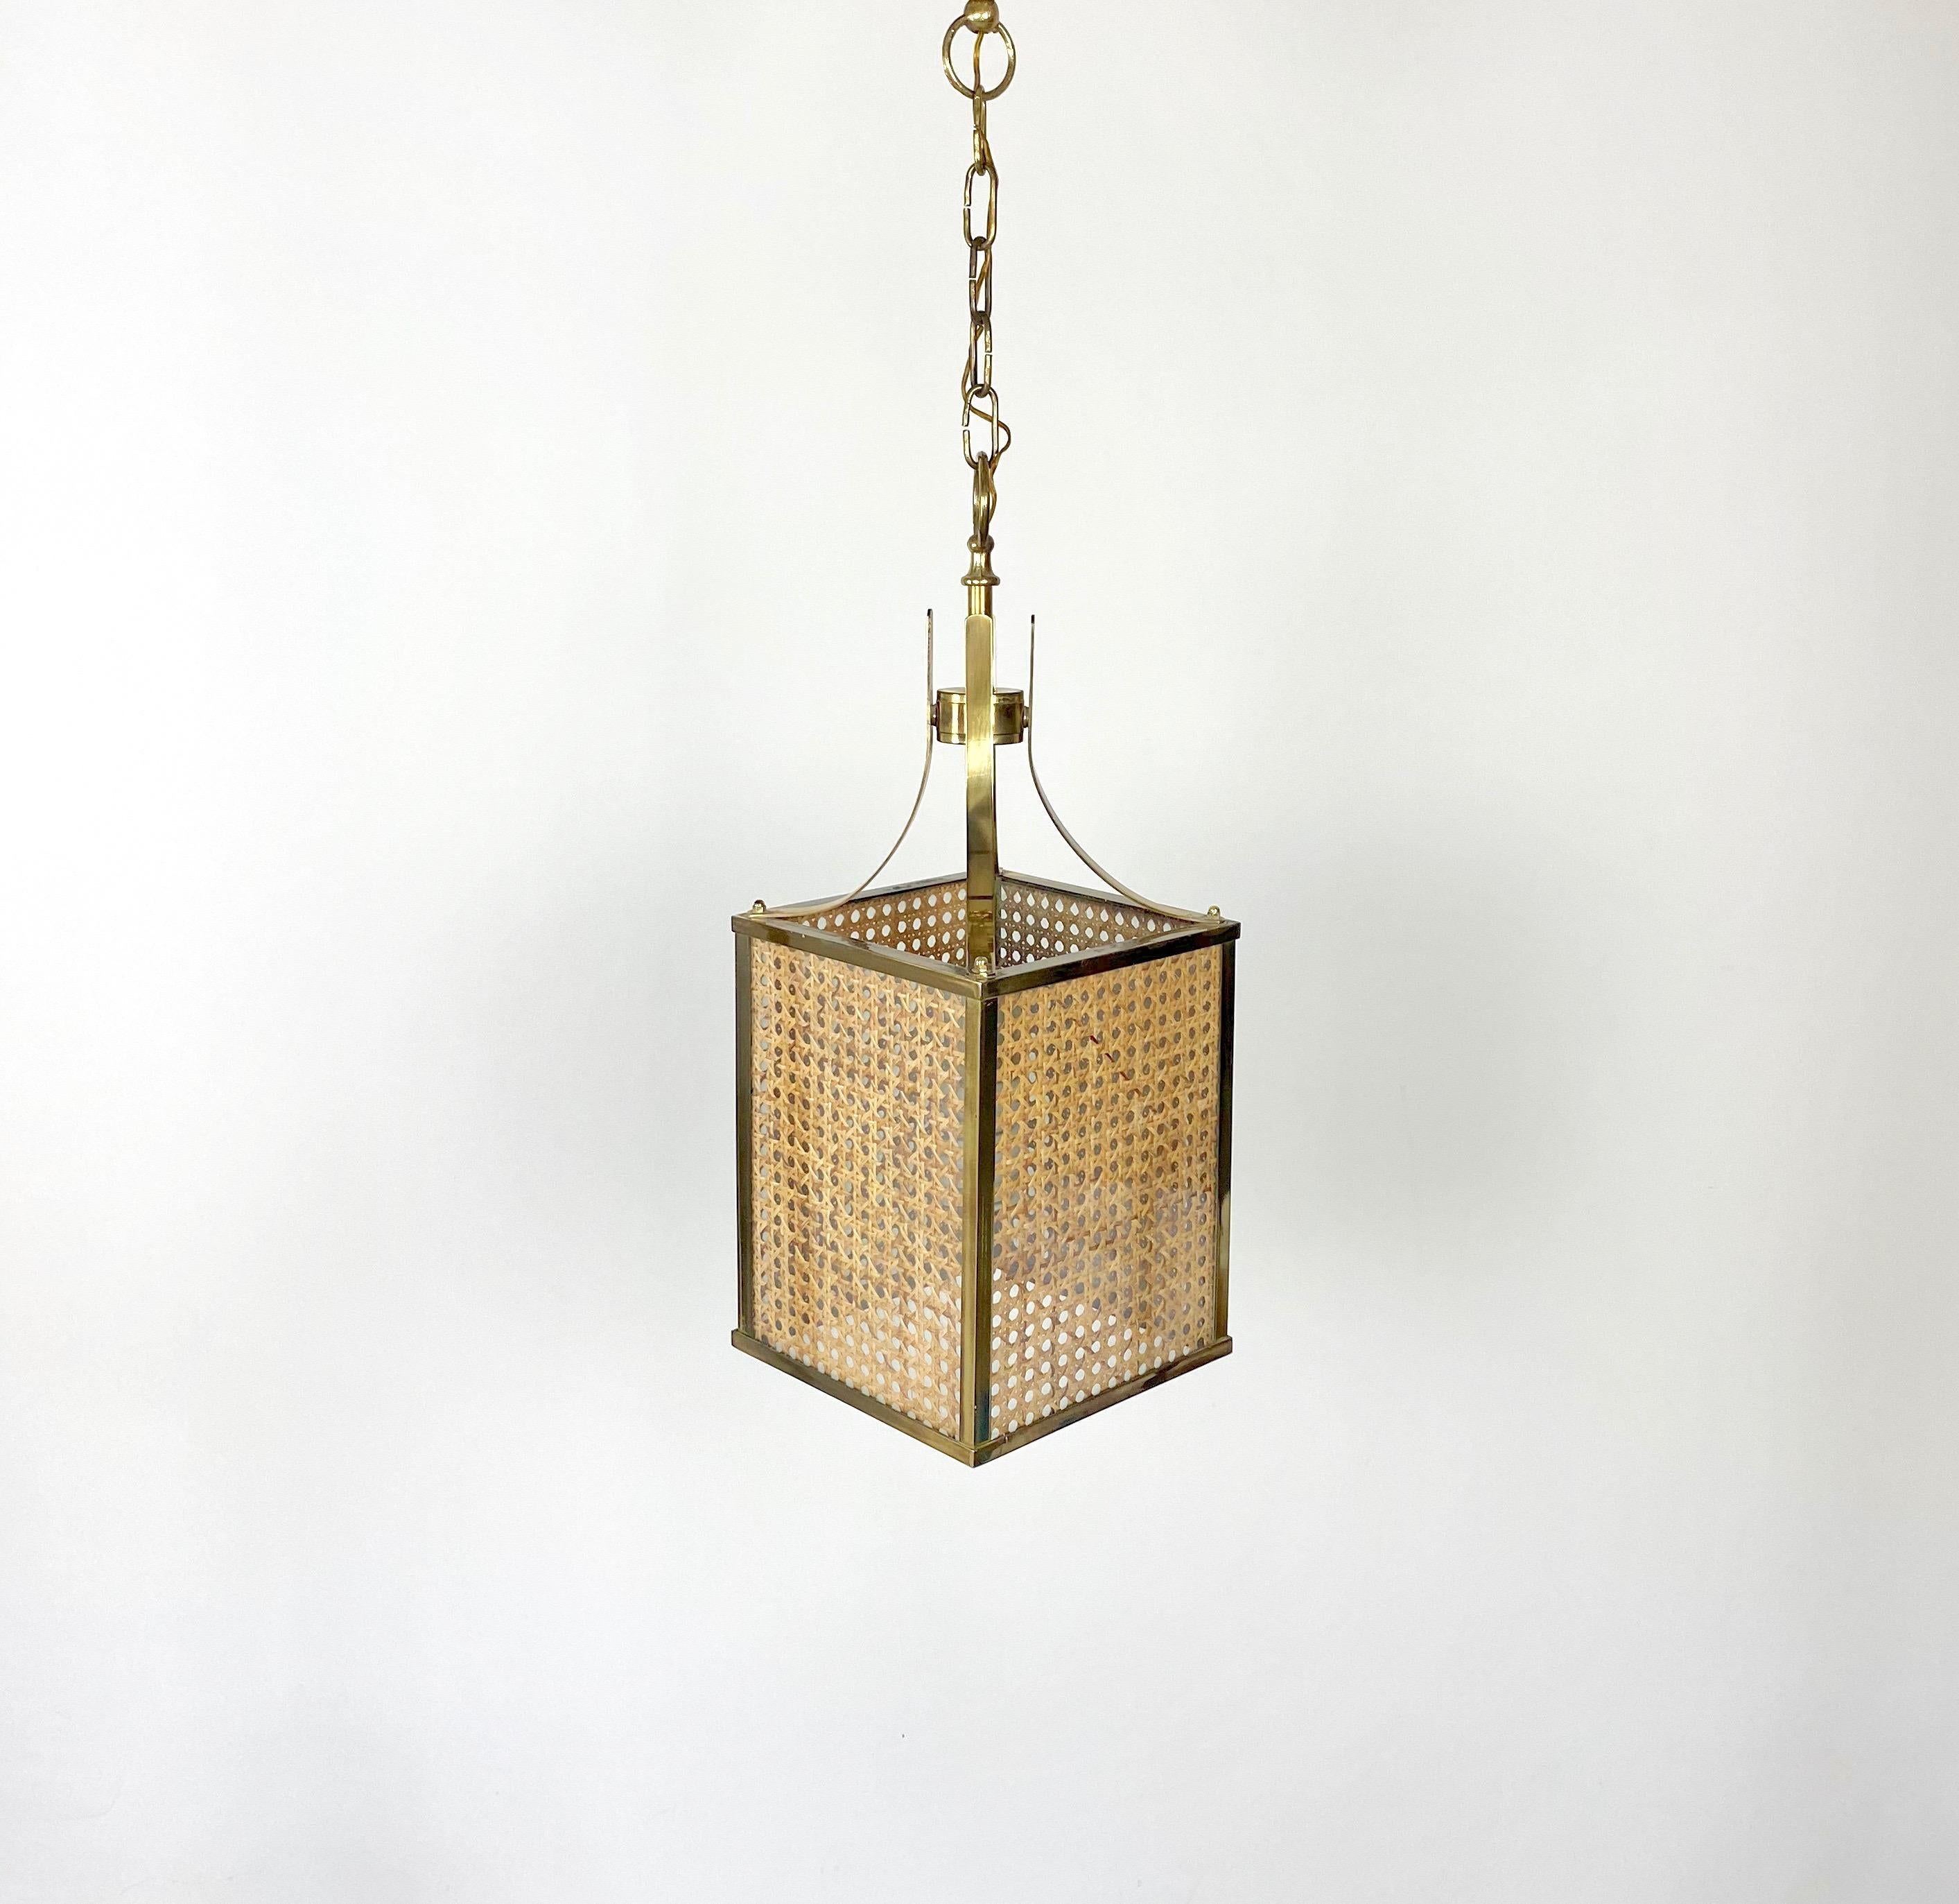 Chandelier pendant in the shape of a lantern made of rattan covered with glass and a brass structure. Made in Italy in the 1970s.